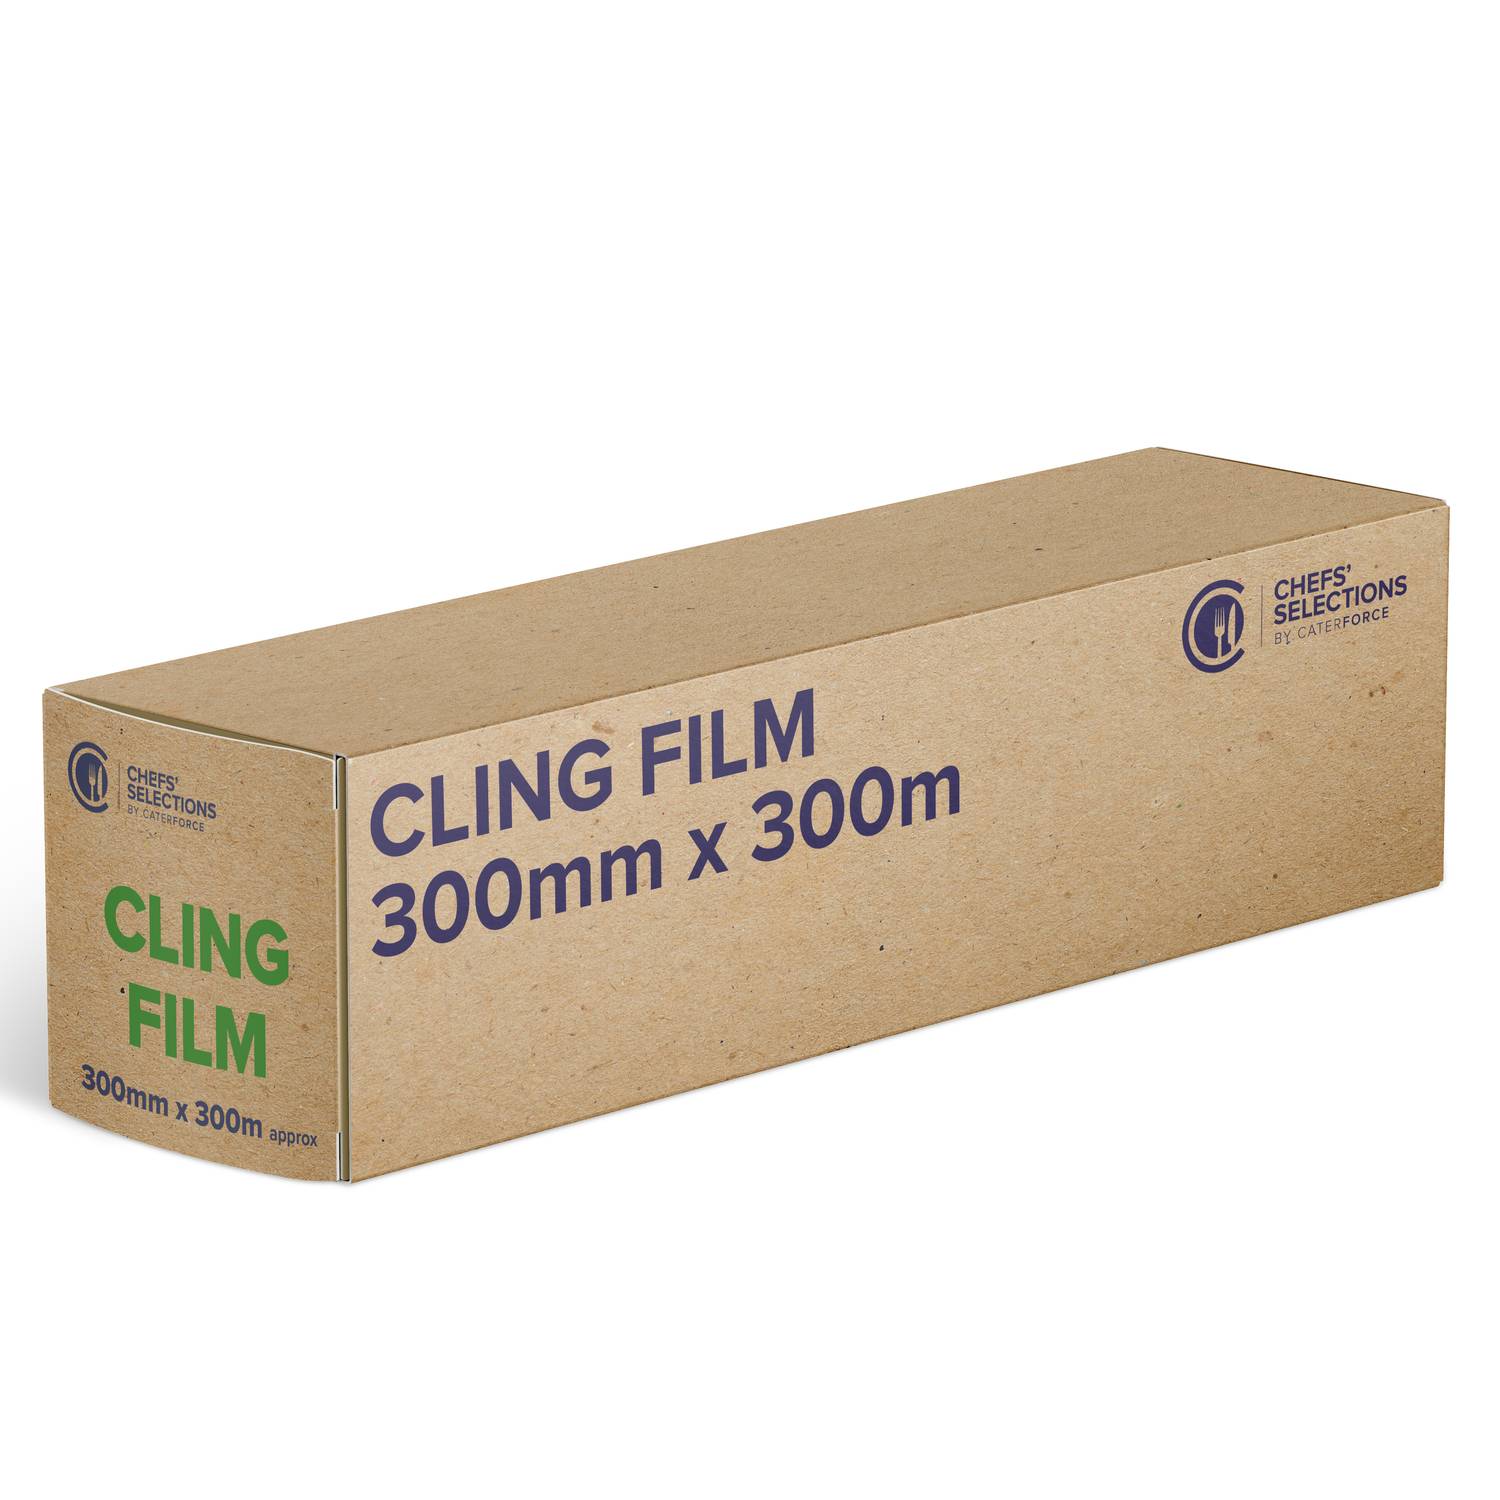 Chefs’ Selections Cling Film 300mm x 300m (6)